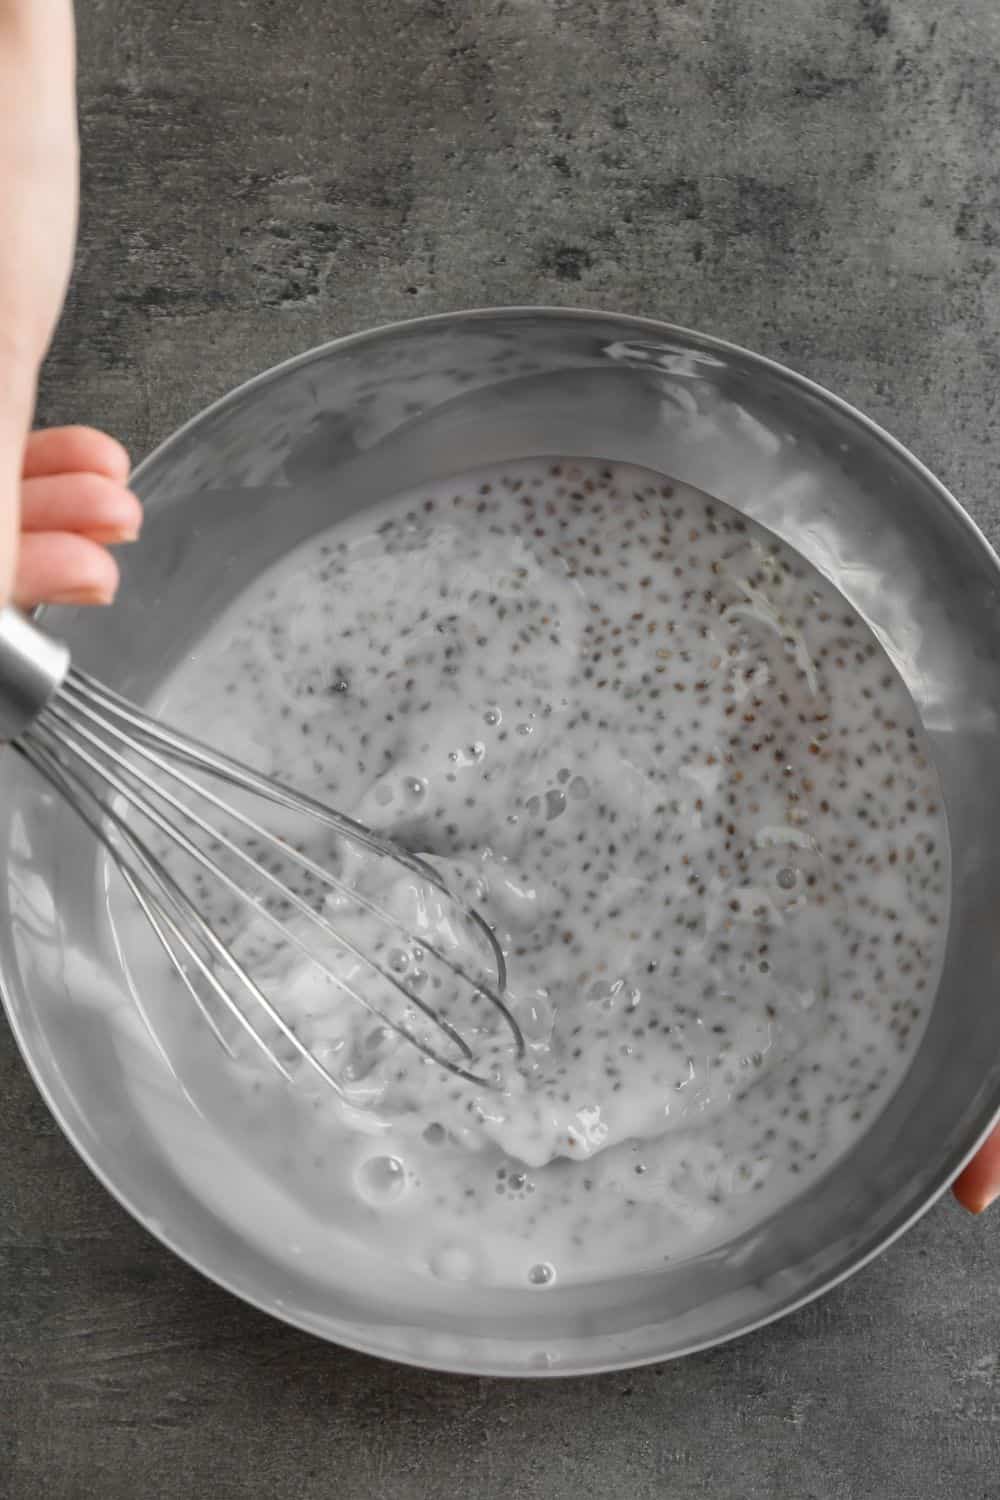 Image of chia seed pudding being made with yogurt and chia seeds.